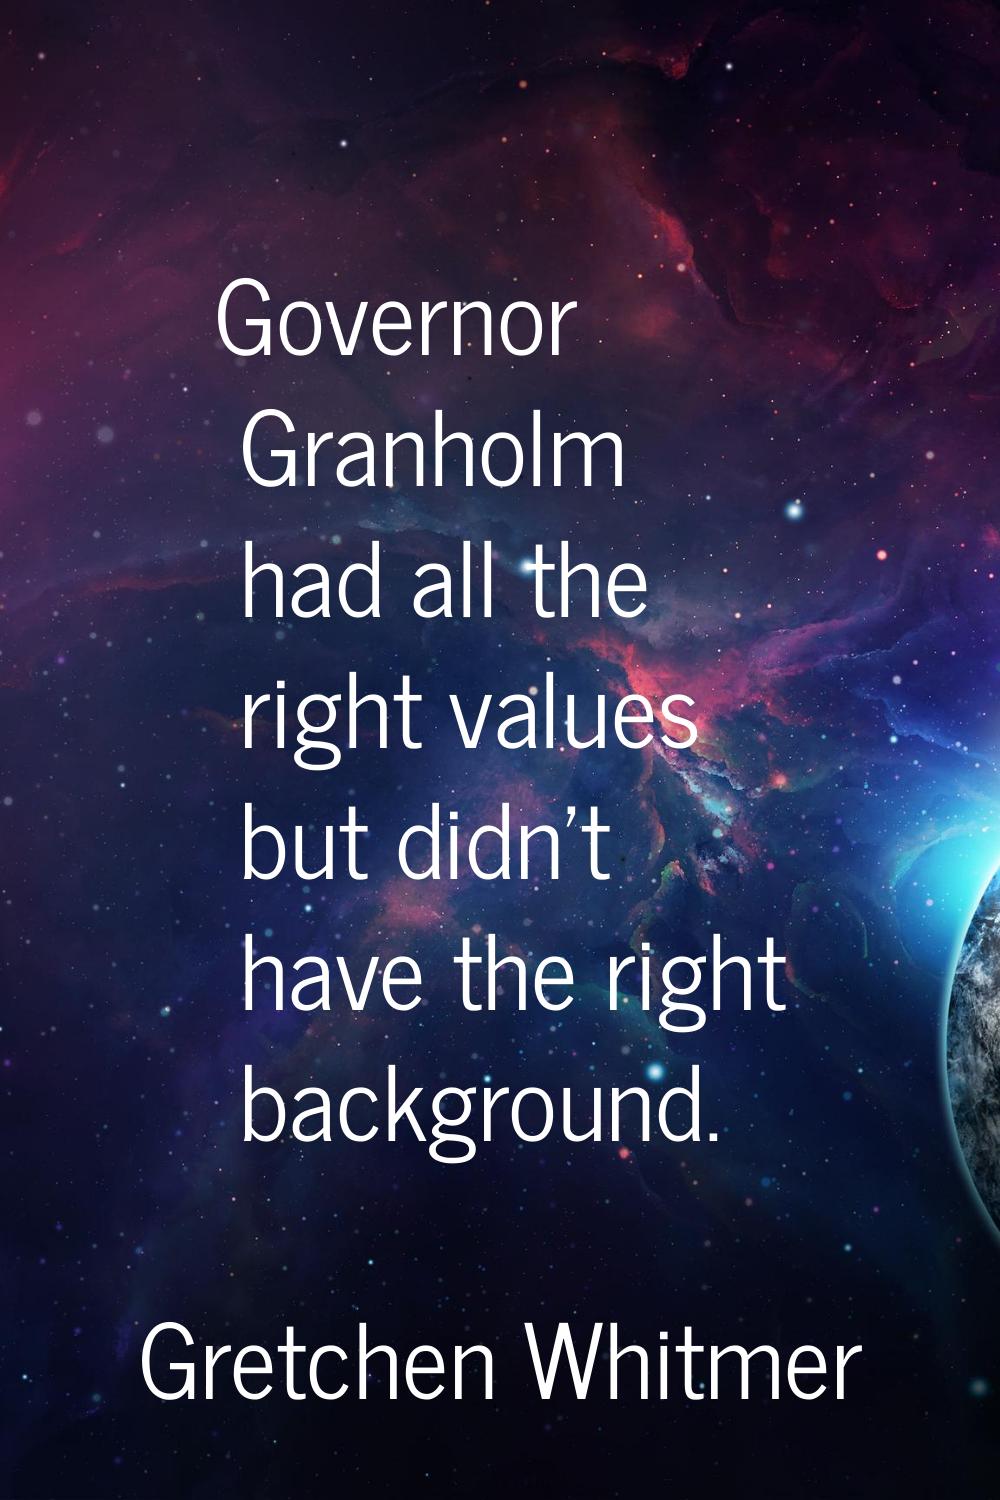 Governor Granholm had all the right values but didn't have the right background.